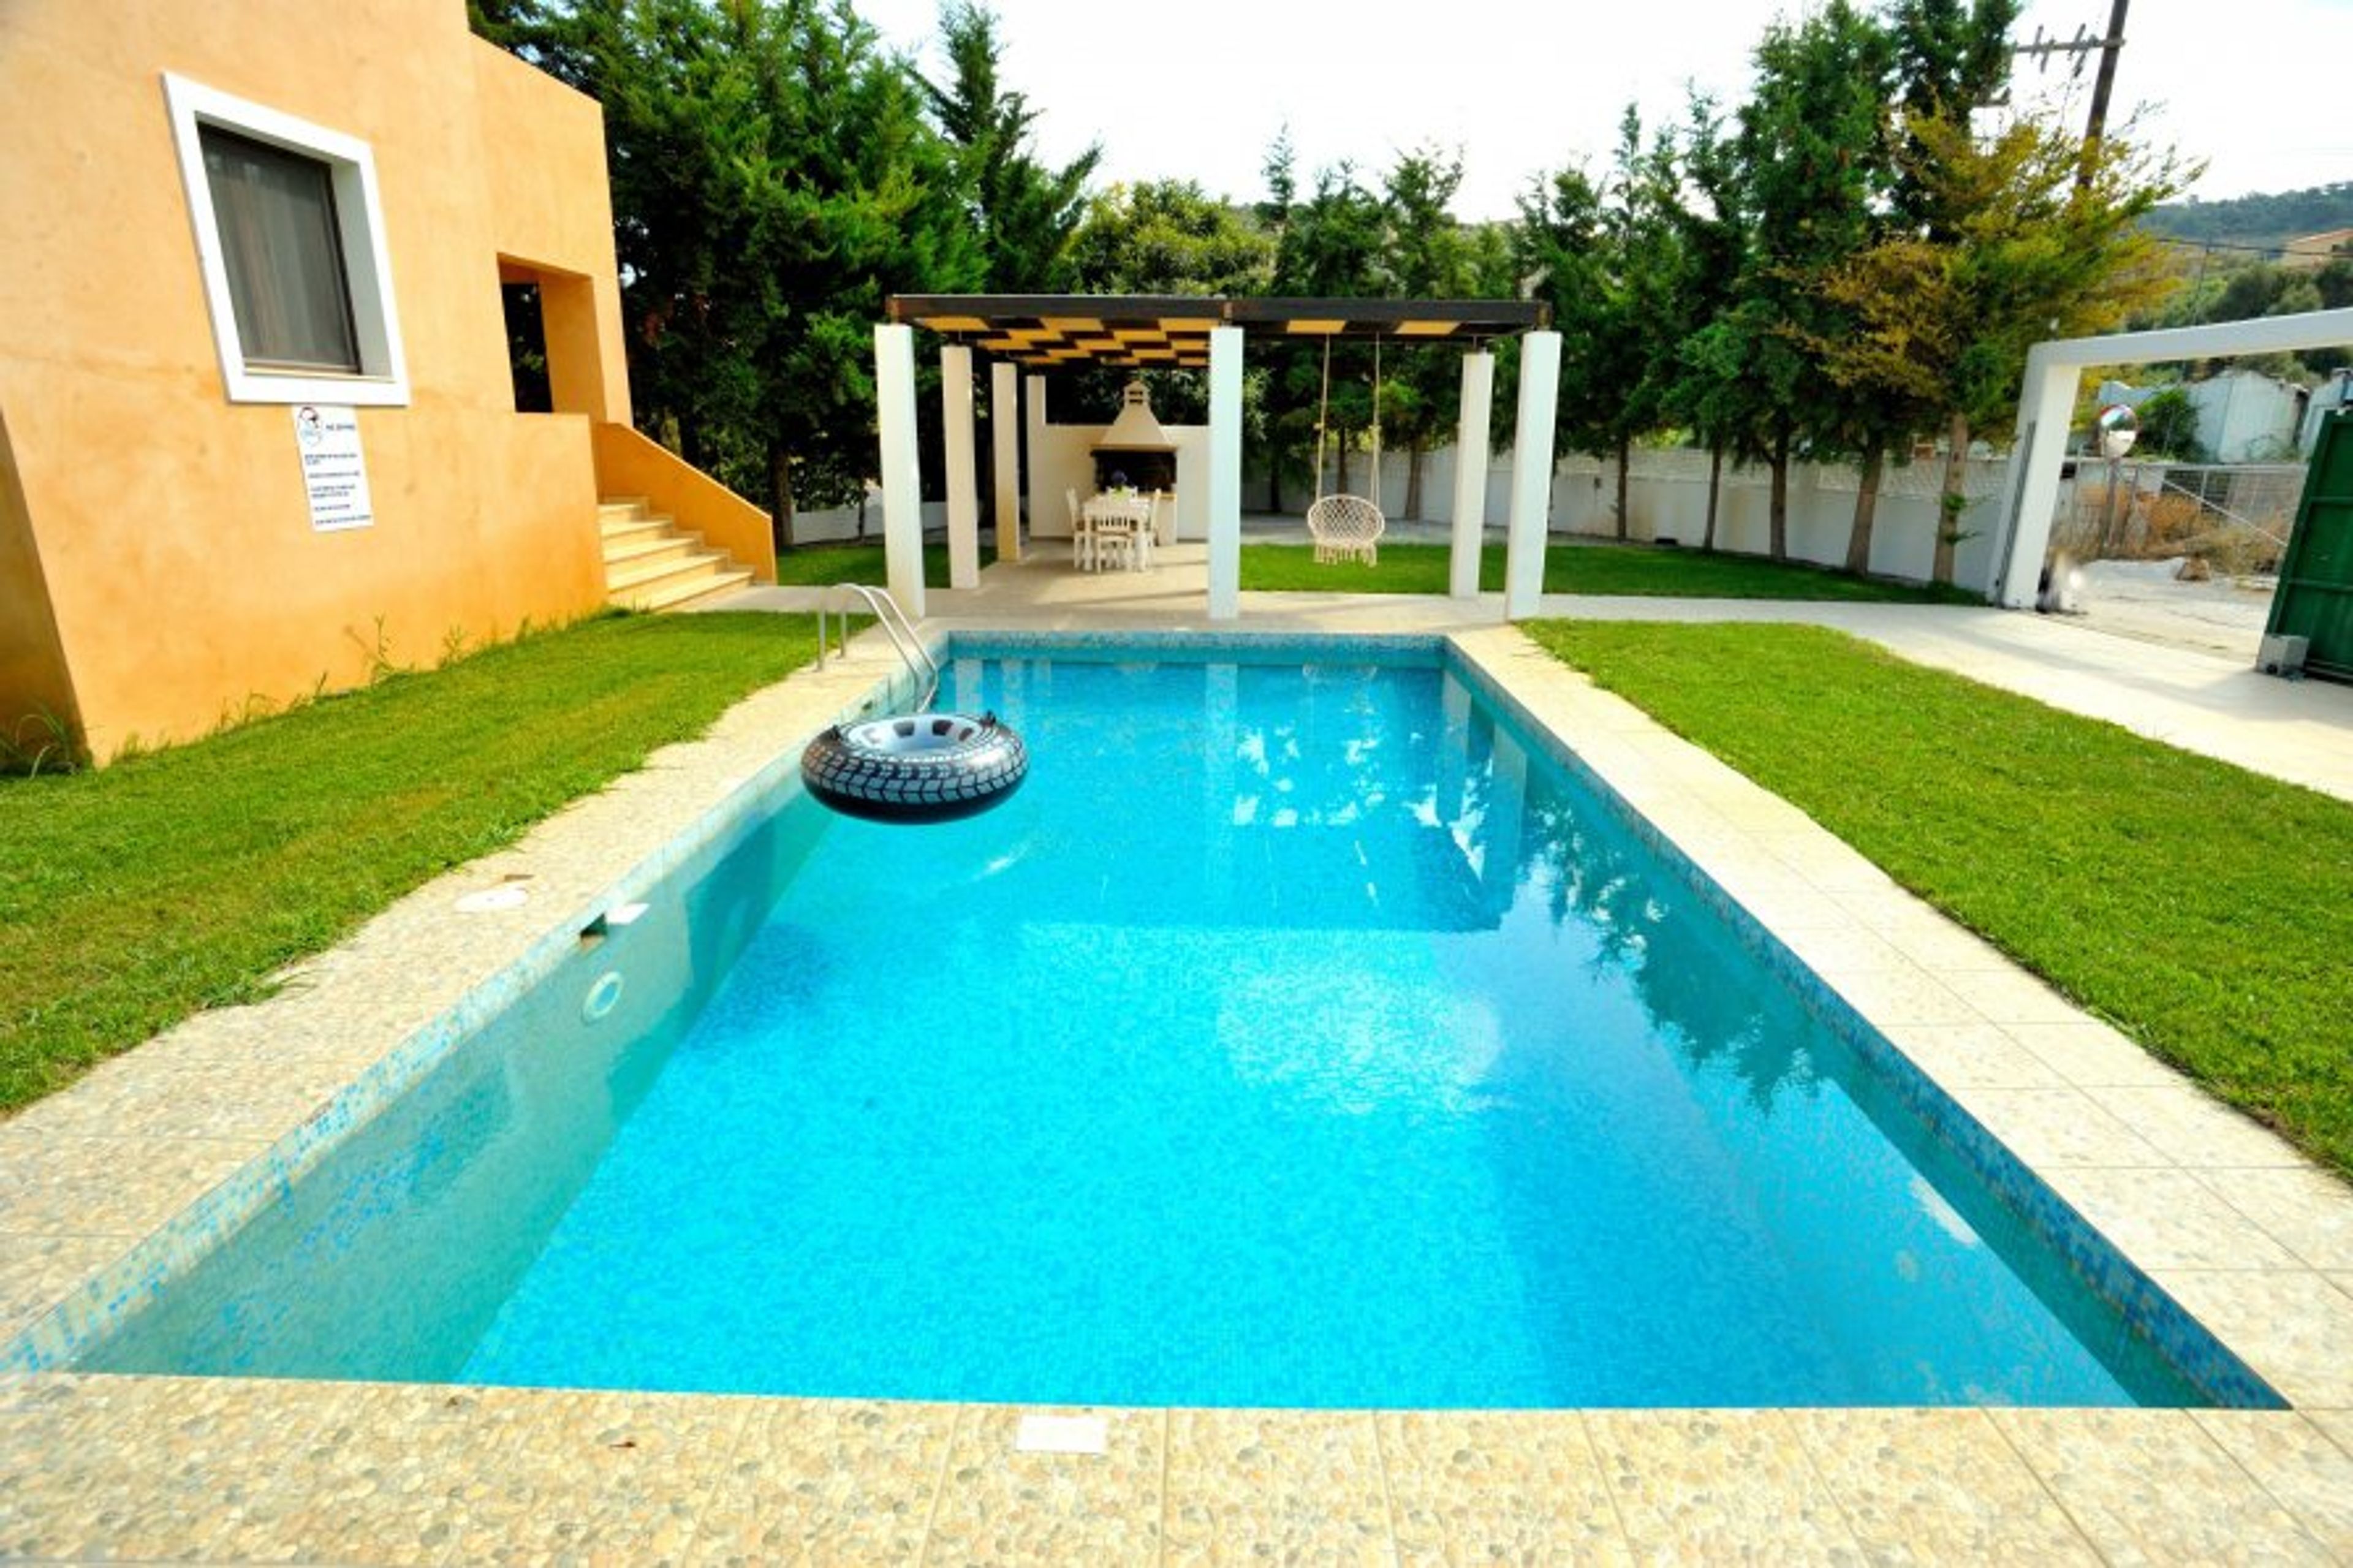 Private 32 m² Pool (4mX8m) with varied depth from 70cm to 160cm